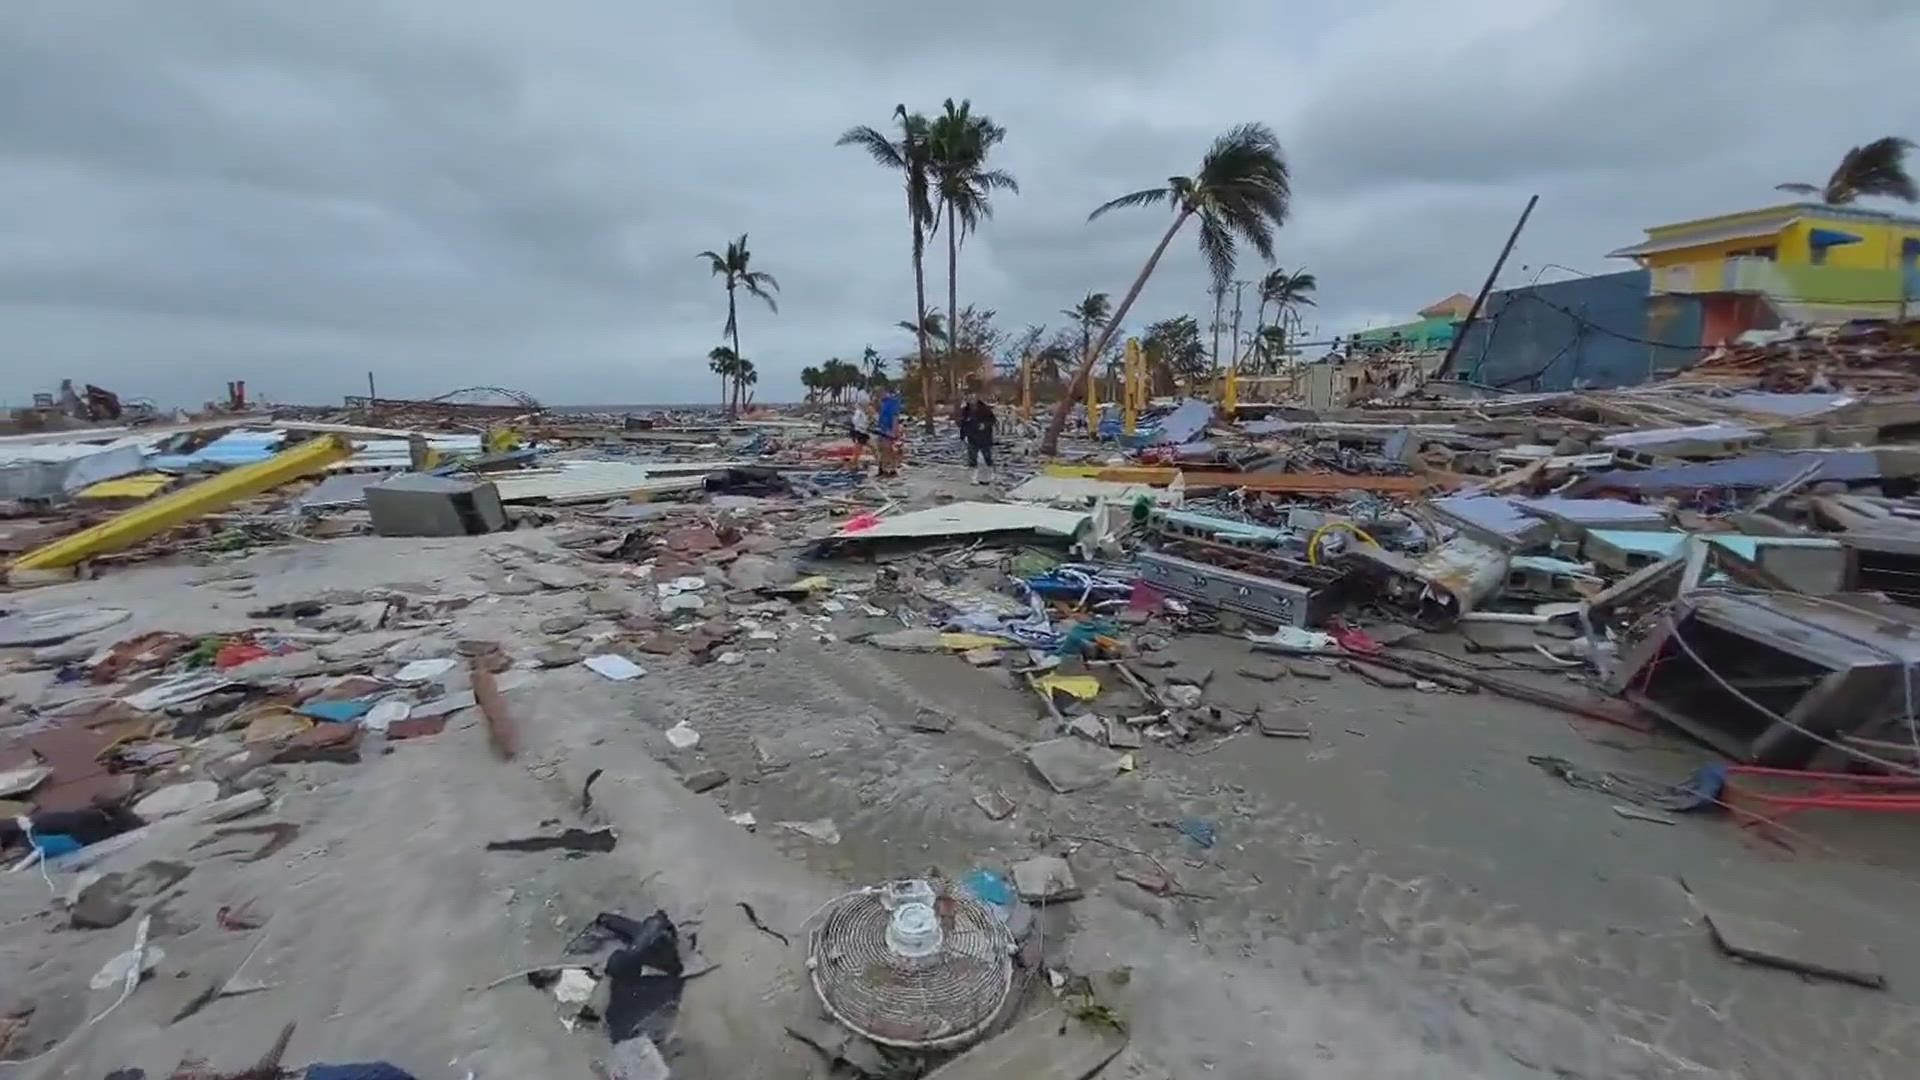 Video taken by Twitter user Bobby Pratt shows Fort Myers beach in the aftermath of Hurricane Ian.